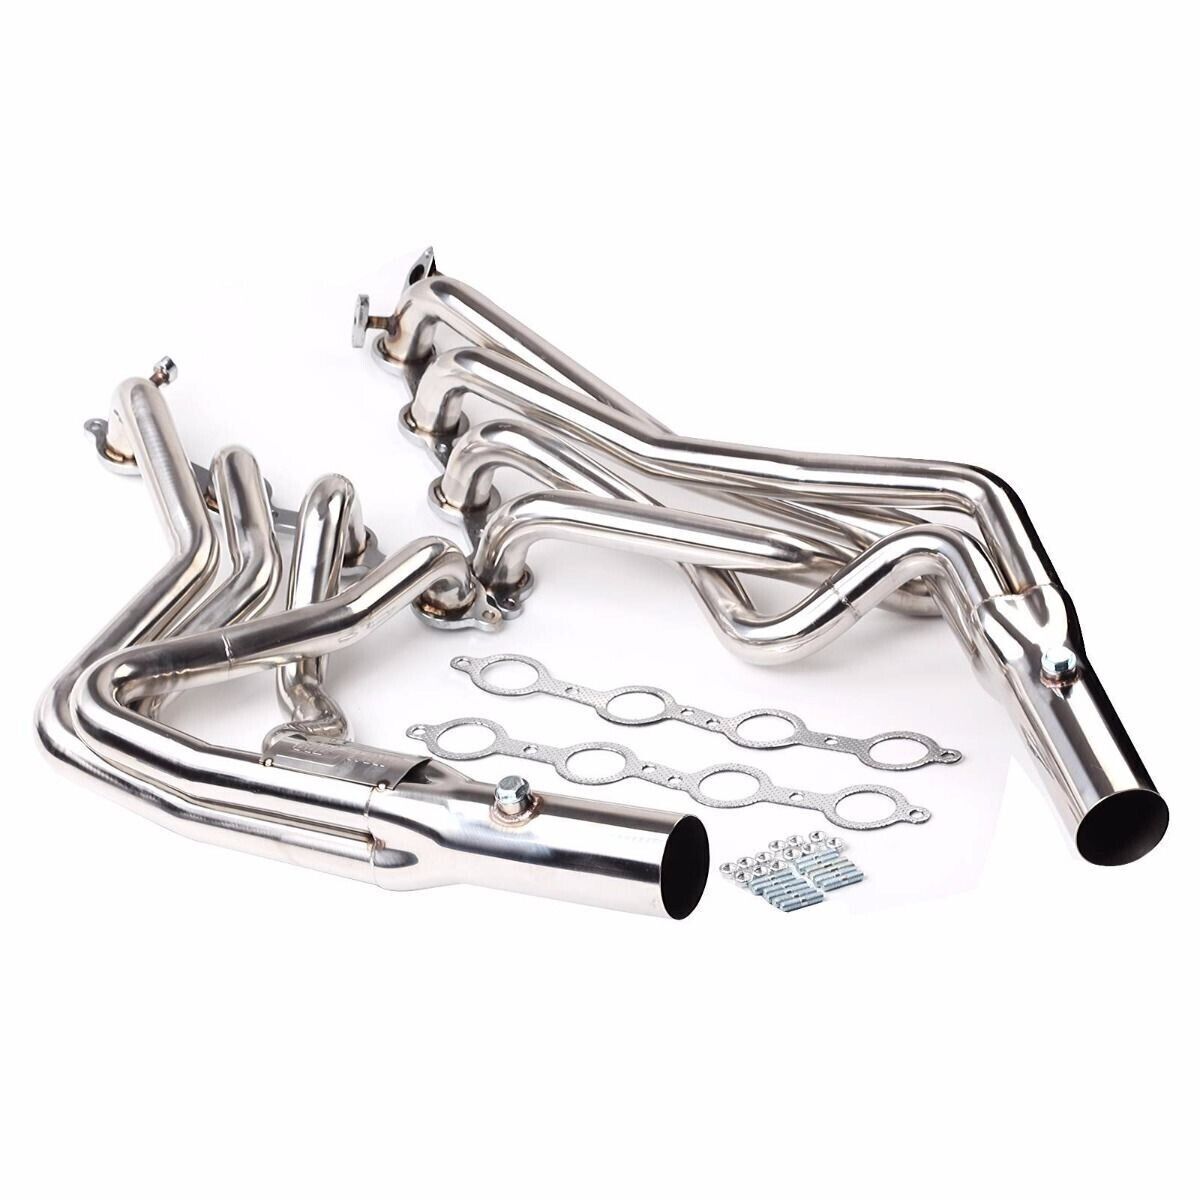 STAINLESS MANIFOLD HEADER FOR 1998-2002 CHEVY CAMARO LS1 5.7L V8 NEW